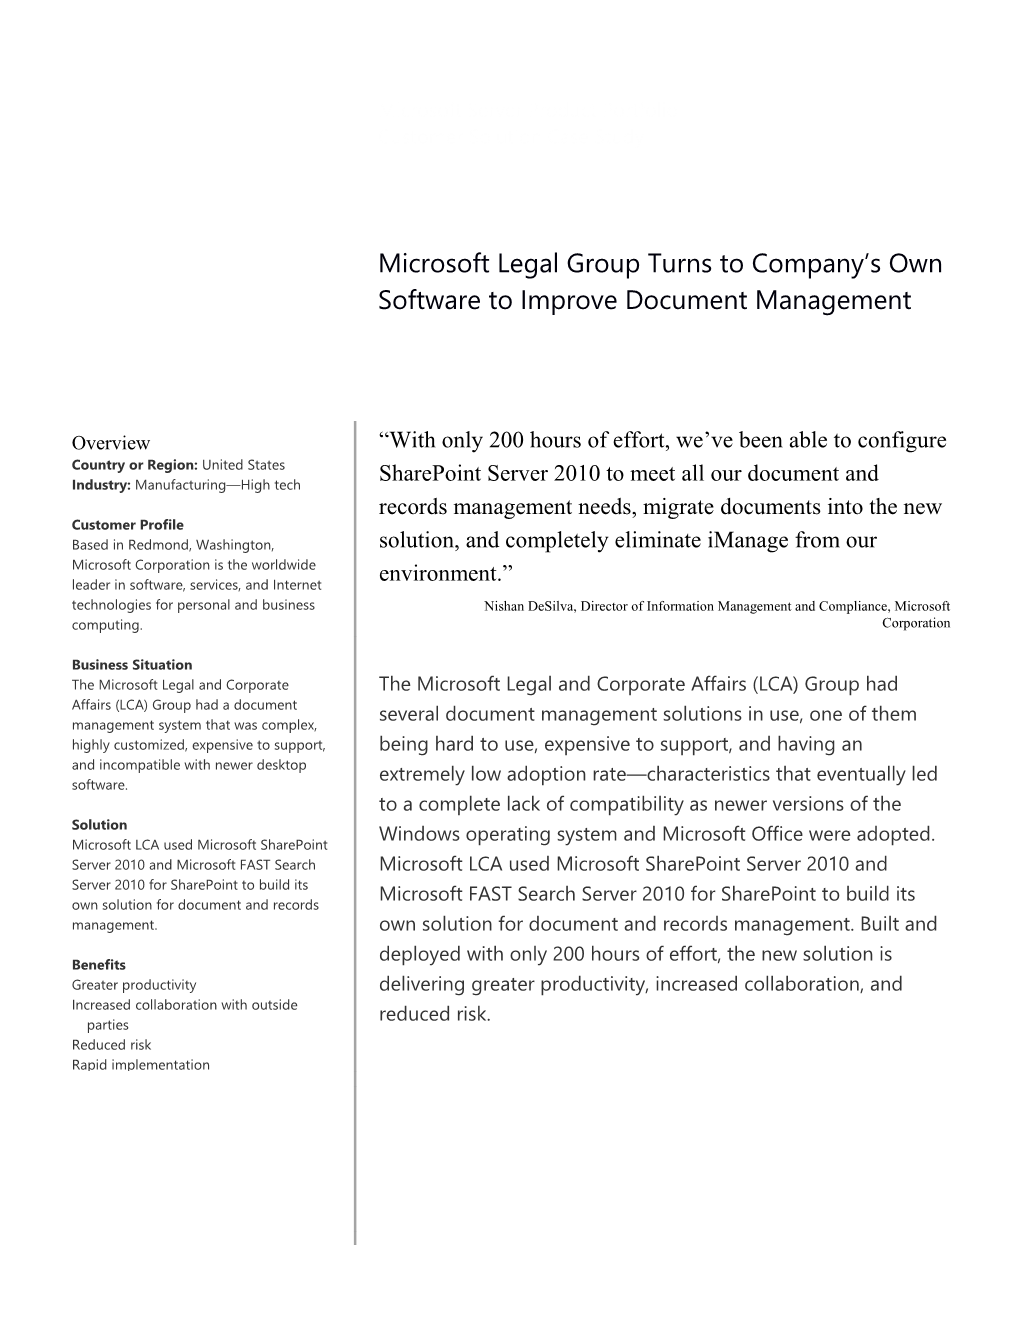 The Microsoft Legal and Corporate Affairs (LCA) Group Consists of 987 Attorneys, Paralegals